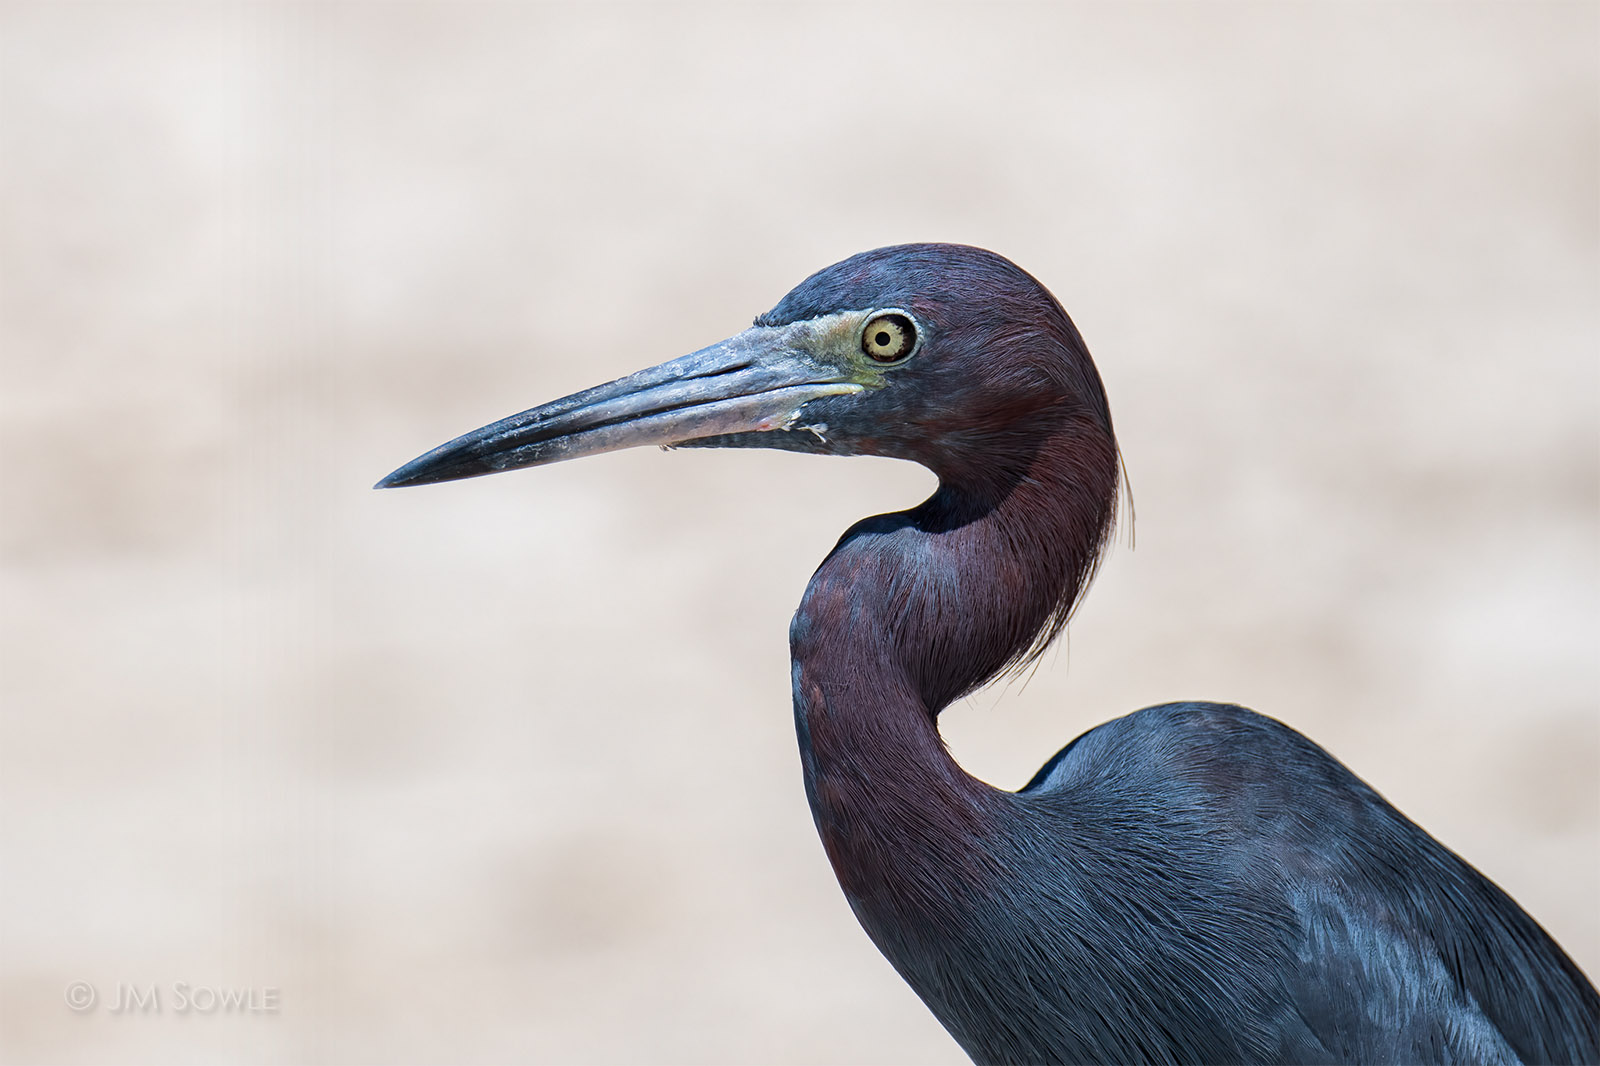 _JMS0421_1600.jpg - I swear that we see a single little blue heron patrolling the shoreline every time we come here.  If it's the same one, then it must be getting old!  A close up to show colors more clearly.